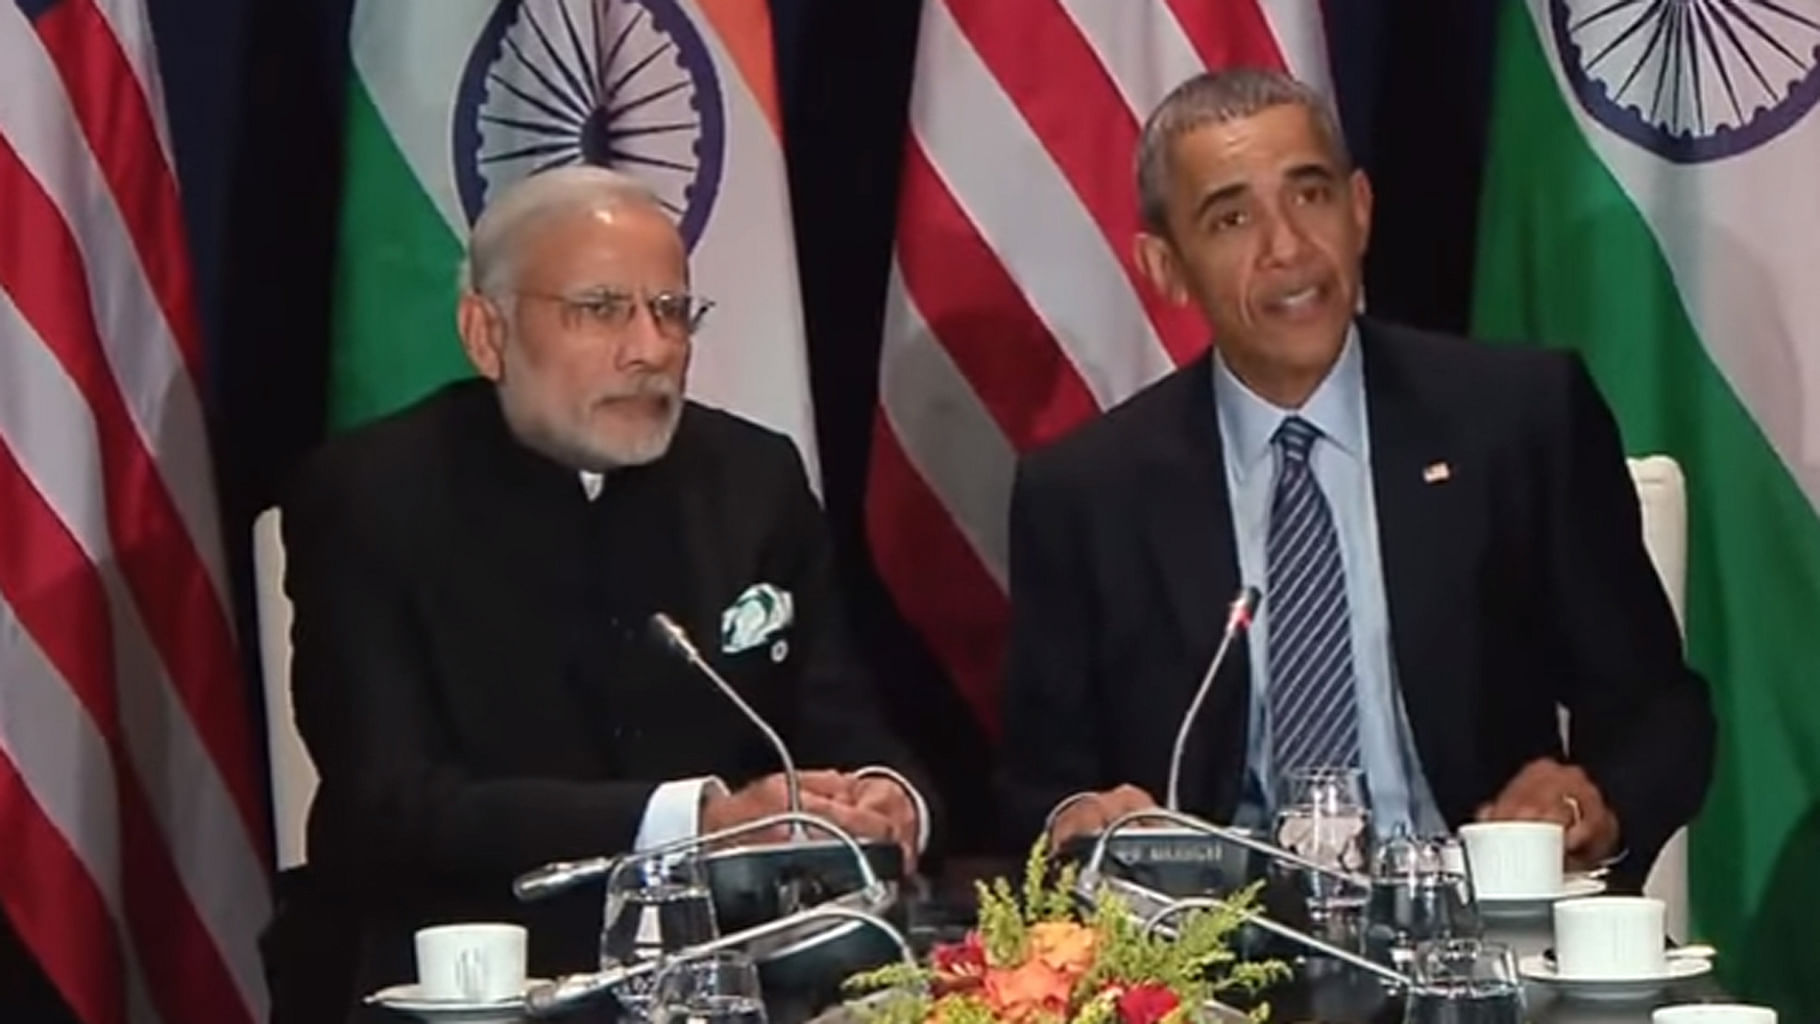 This will be Modi’s fourth US visit in two years. (Photo: YouTube screengrab)